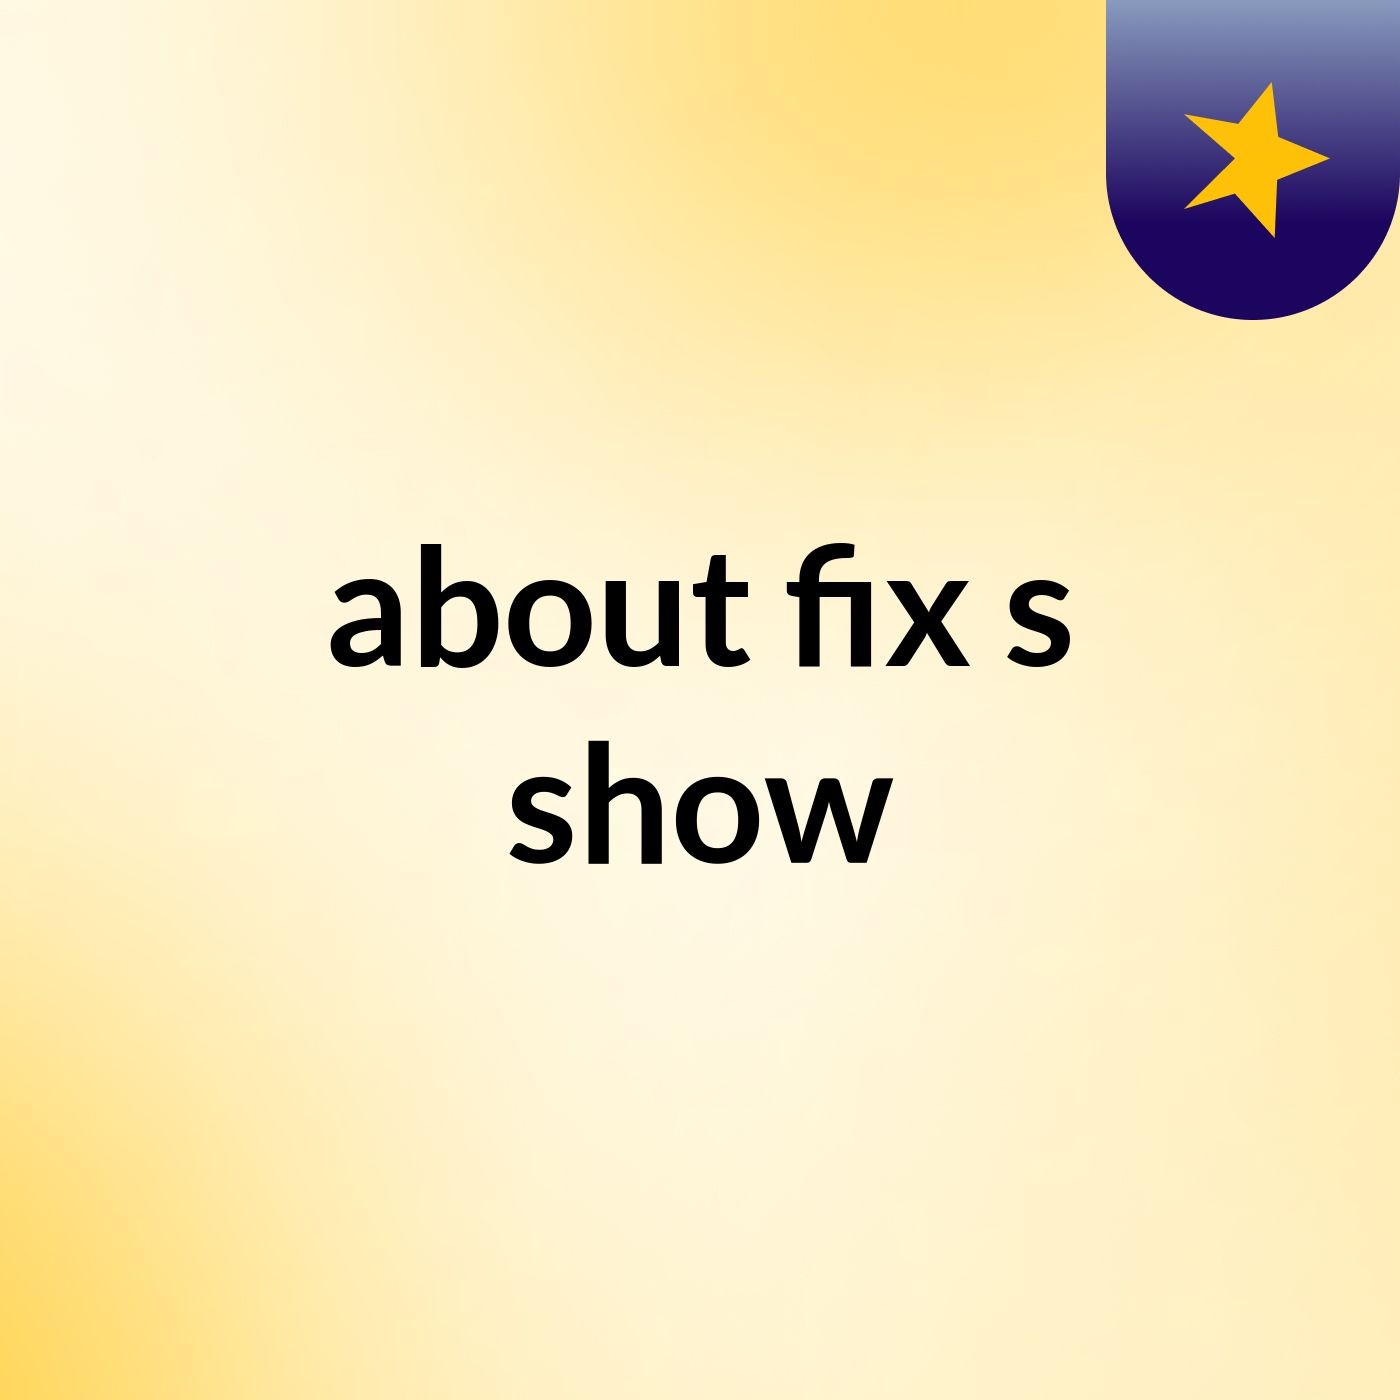 about fix's show